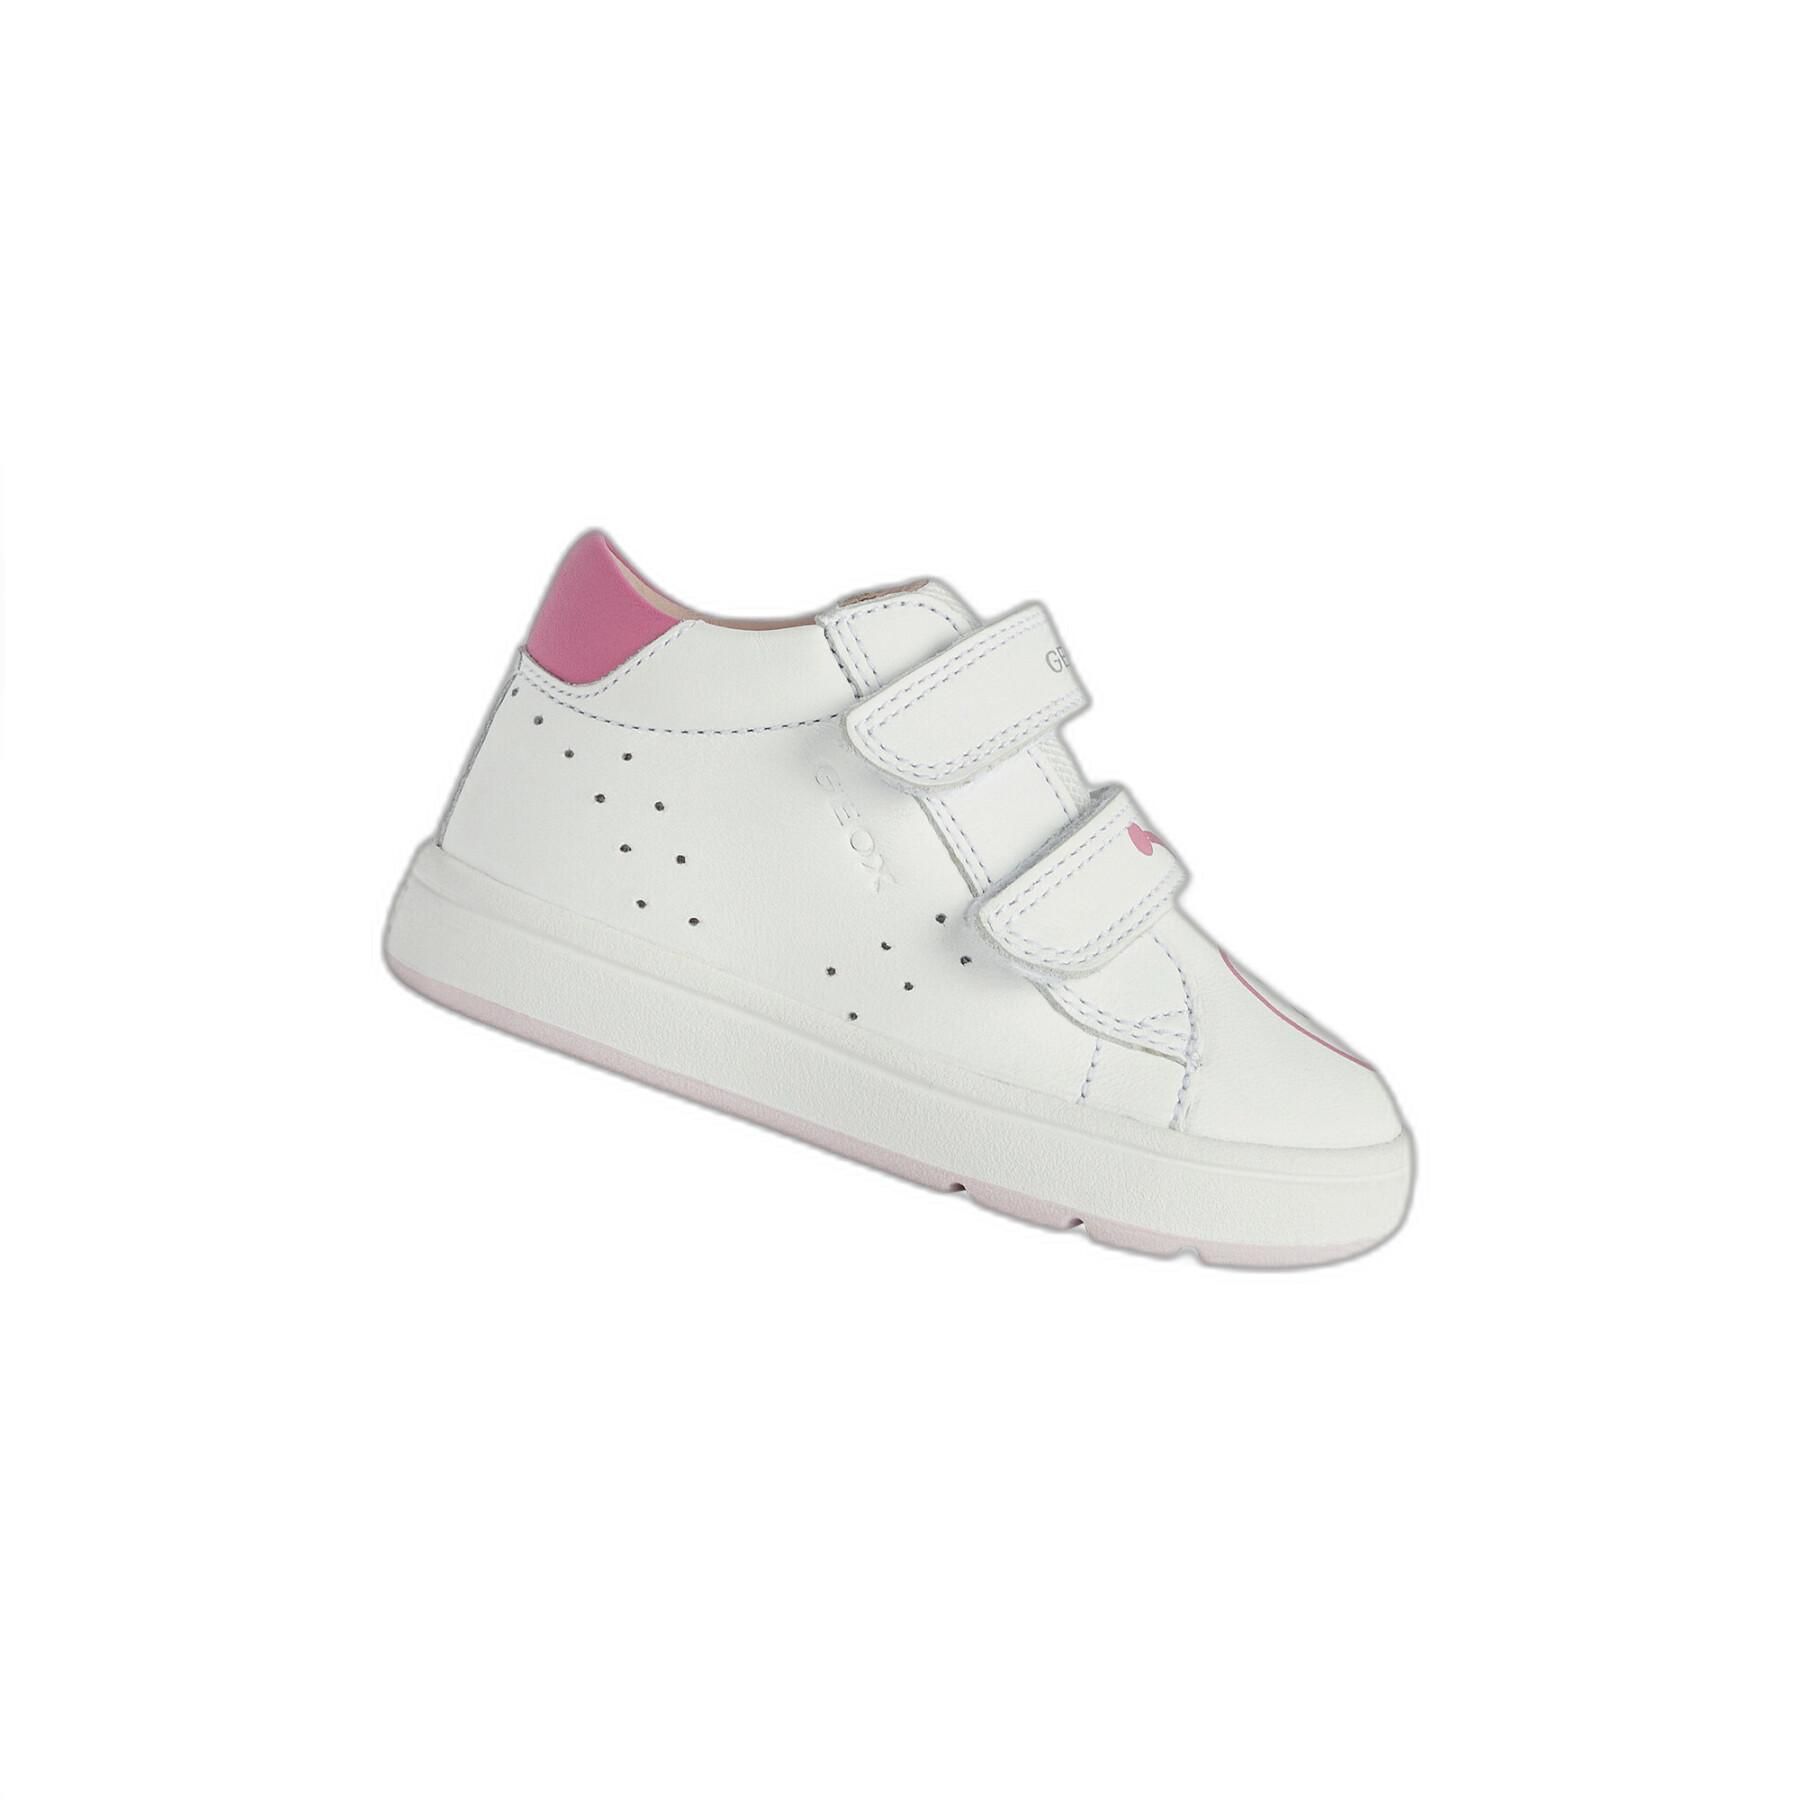 Baby girl's first steps shoes Geox Biglia